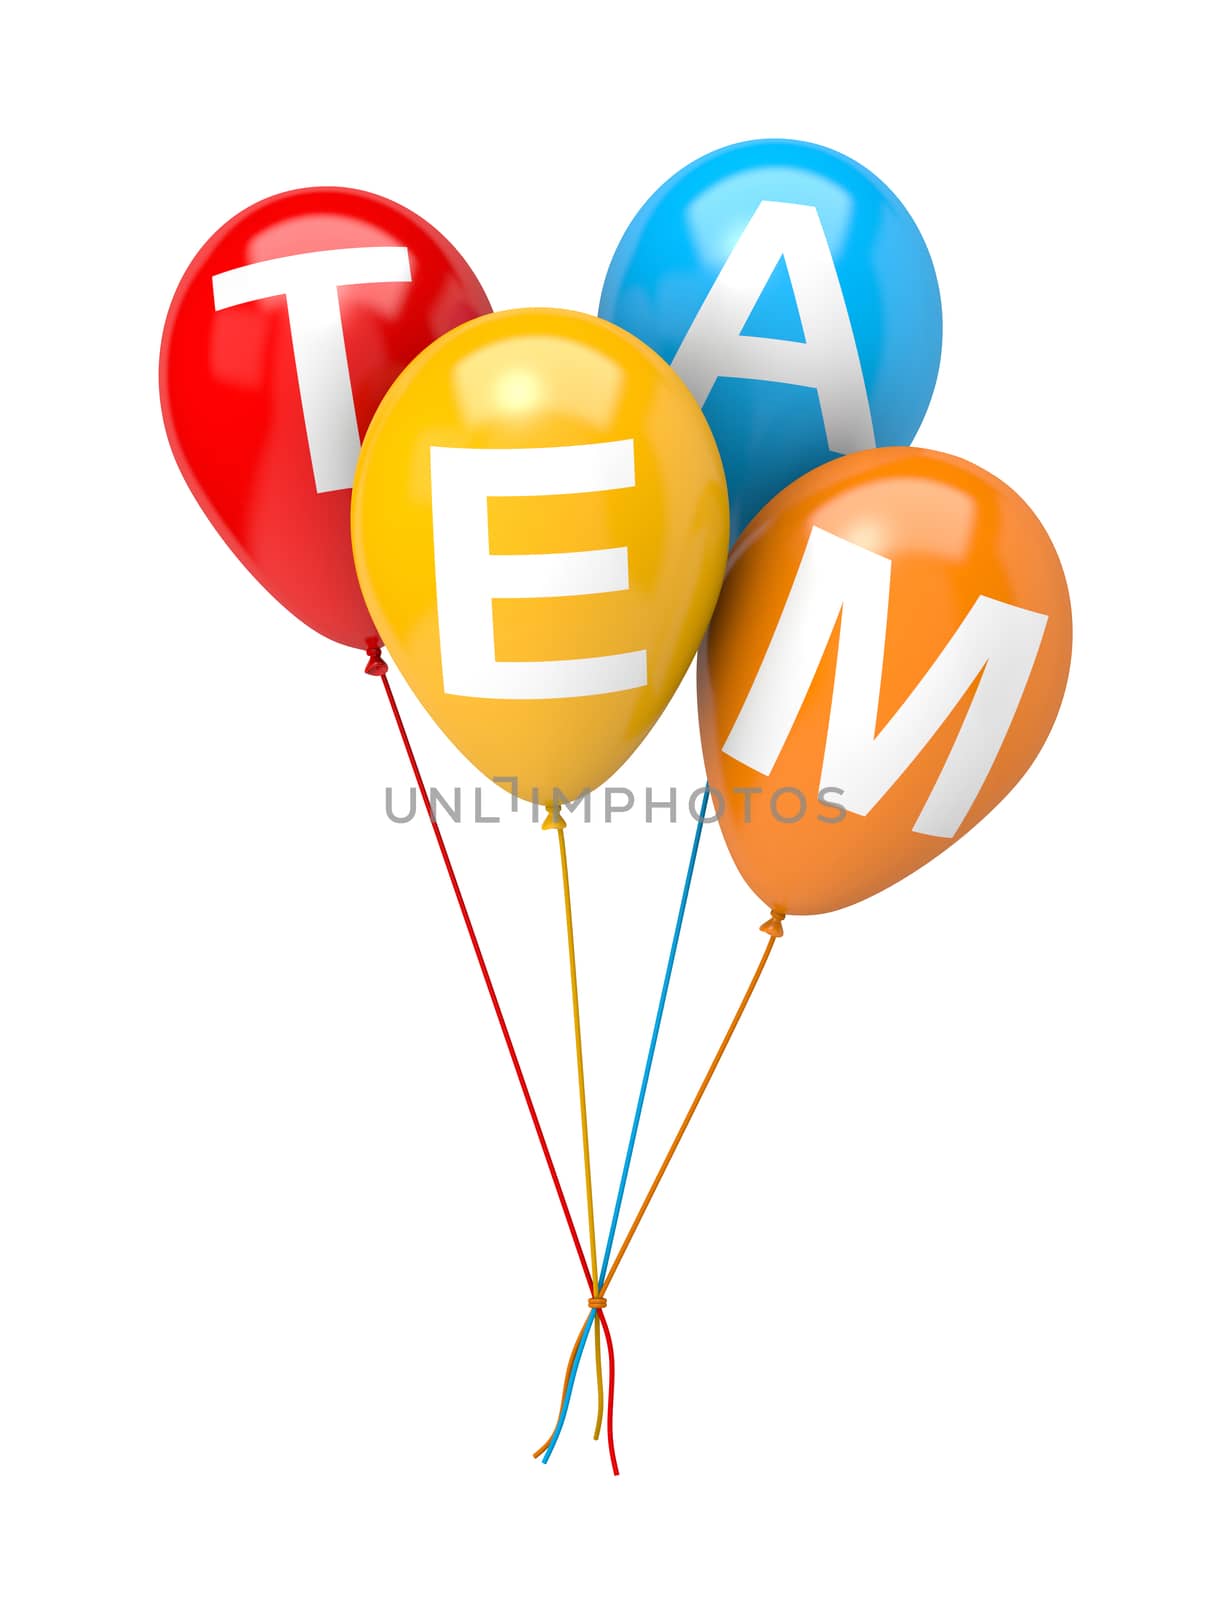 Bunch of Vibrant Color Balloons with Team Text Isolated on White Background 3D Illustration, Team Concept